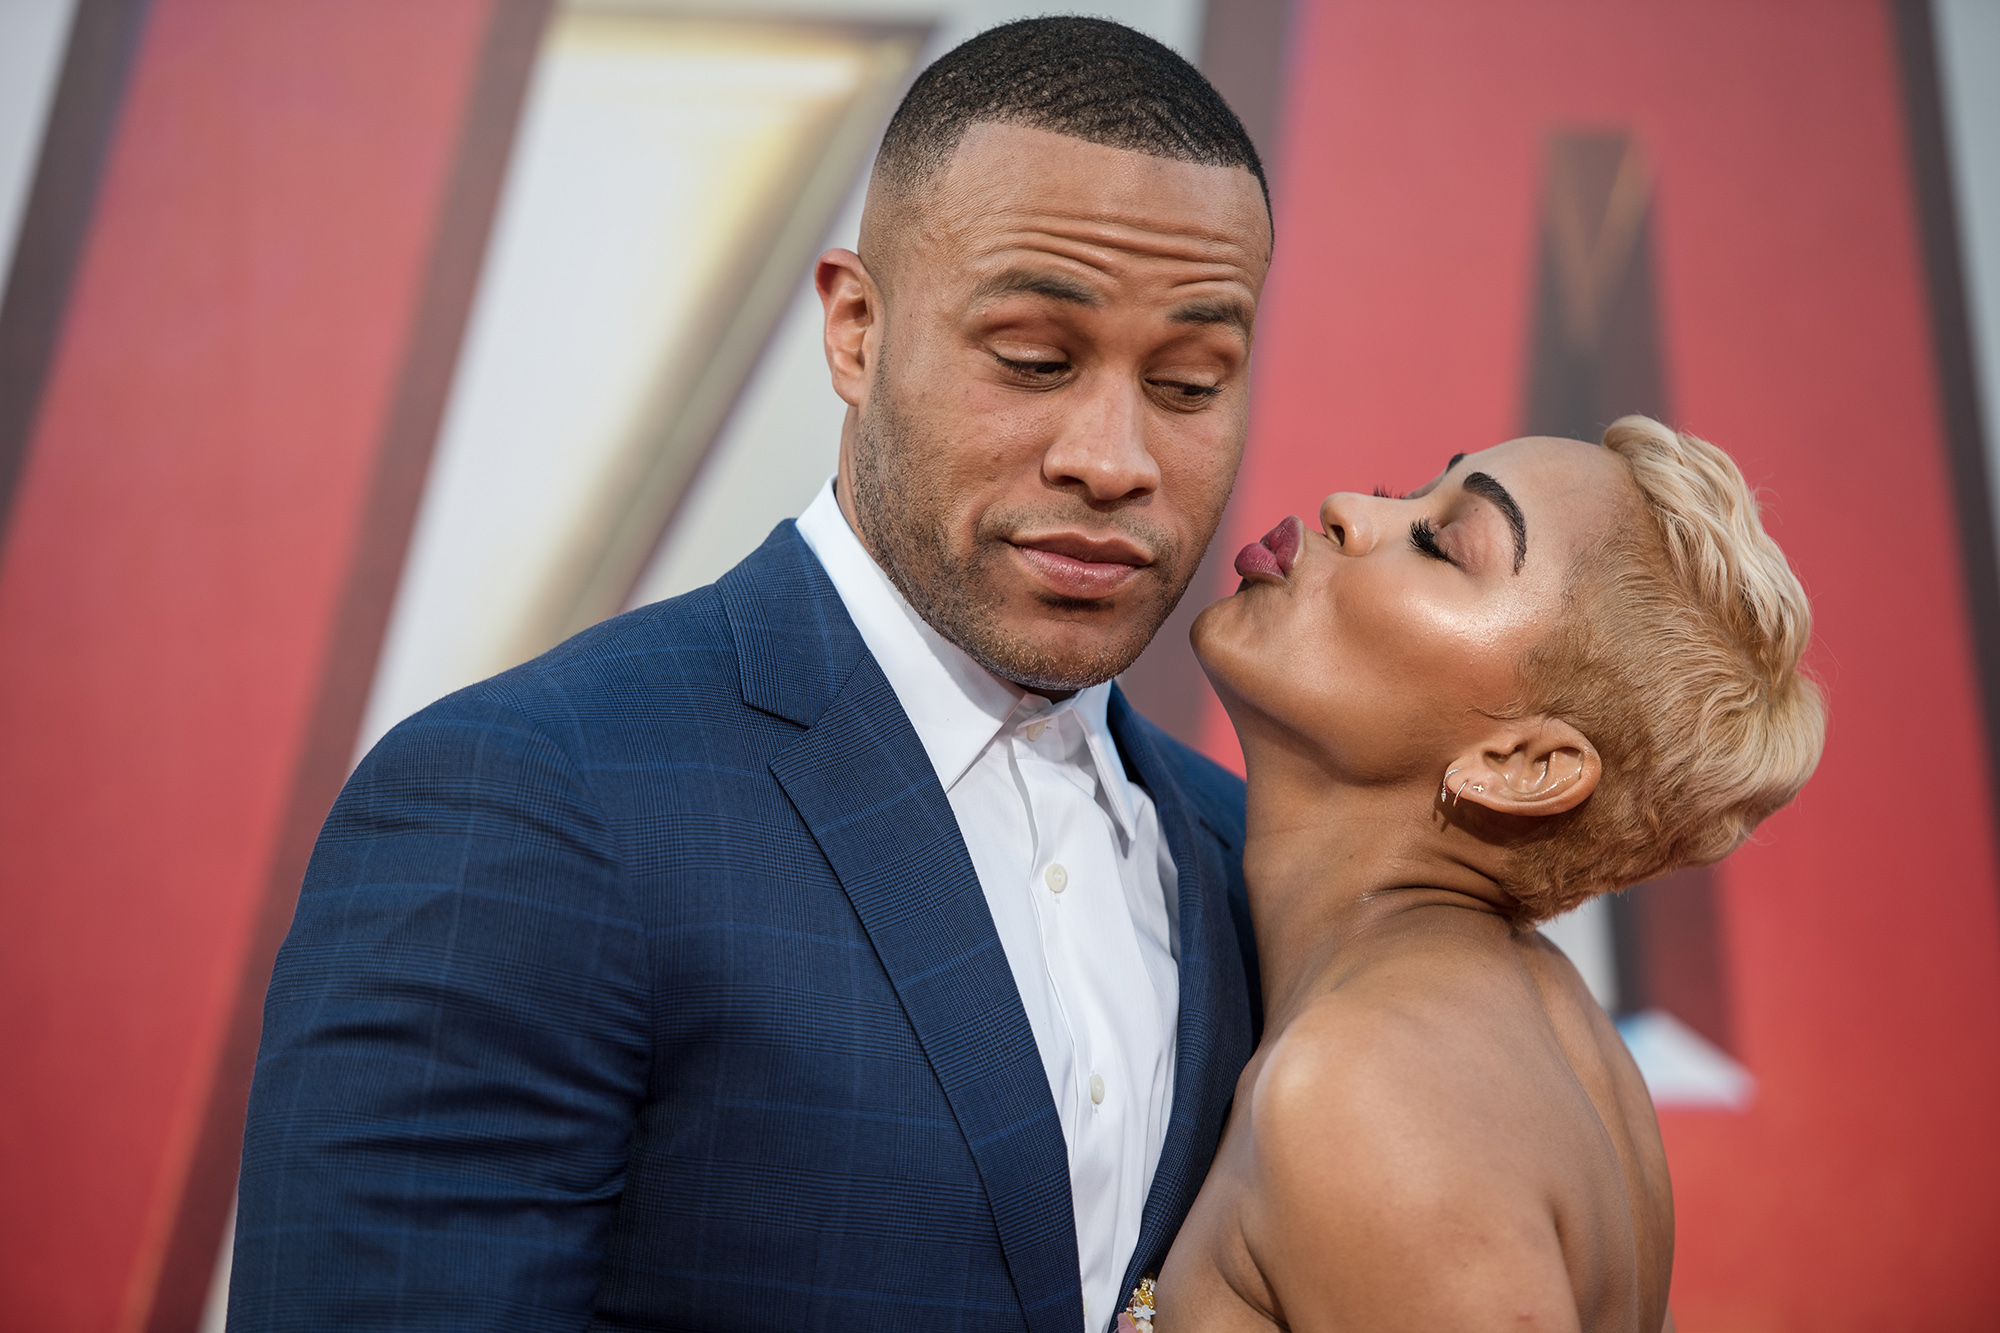 Devon Franklin And Wife Meagan Good Are Officially Divorced After 9 Years Together The 